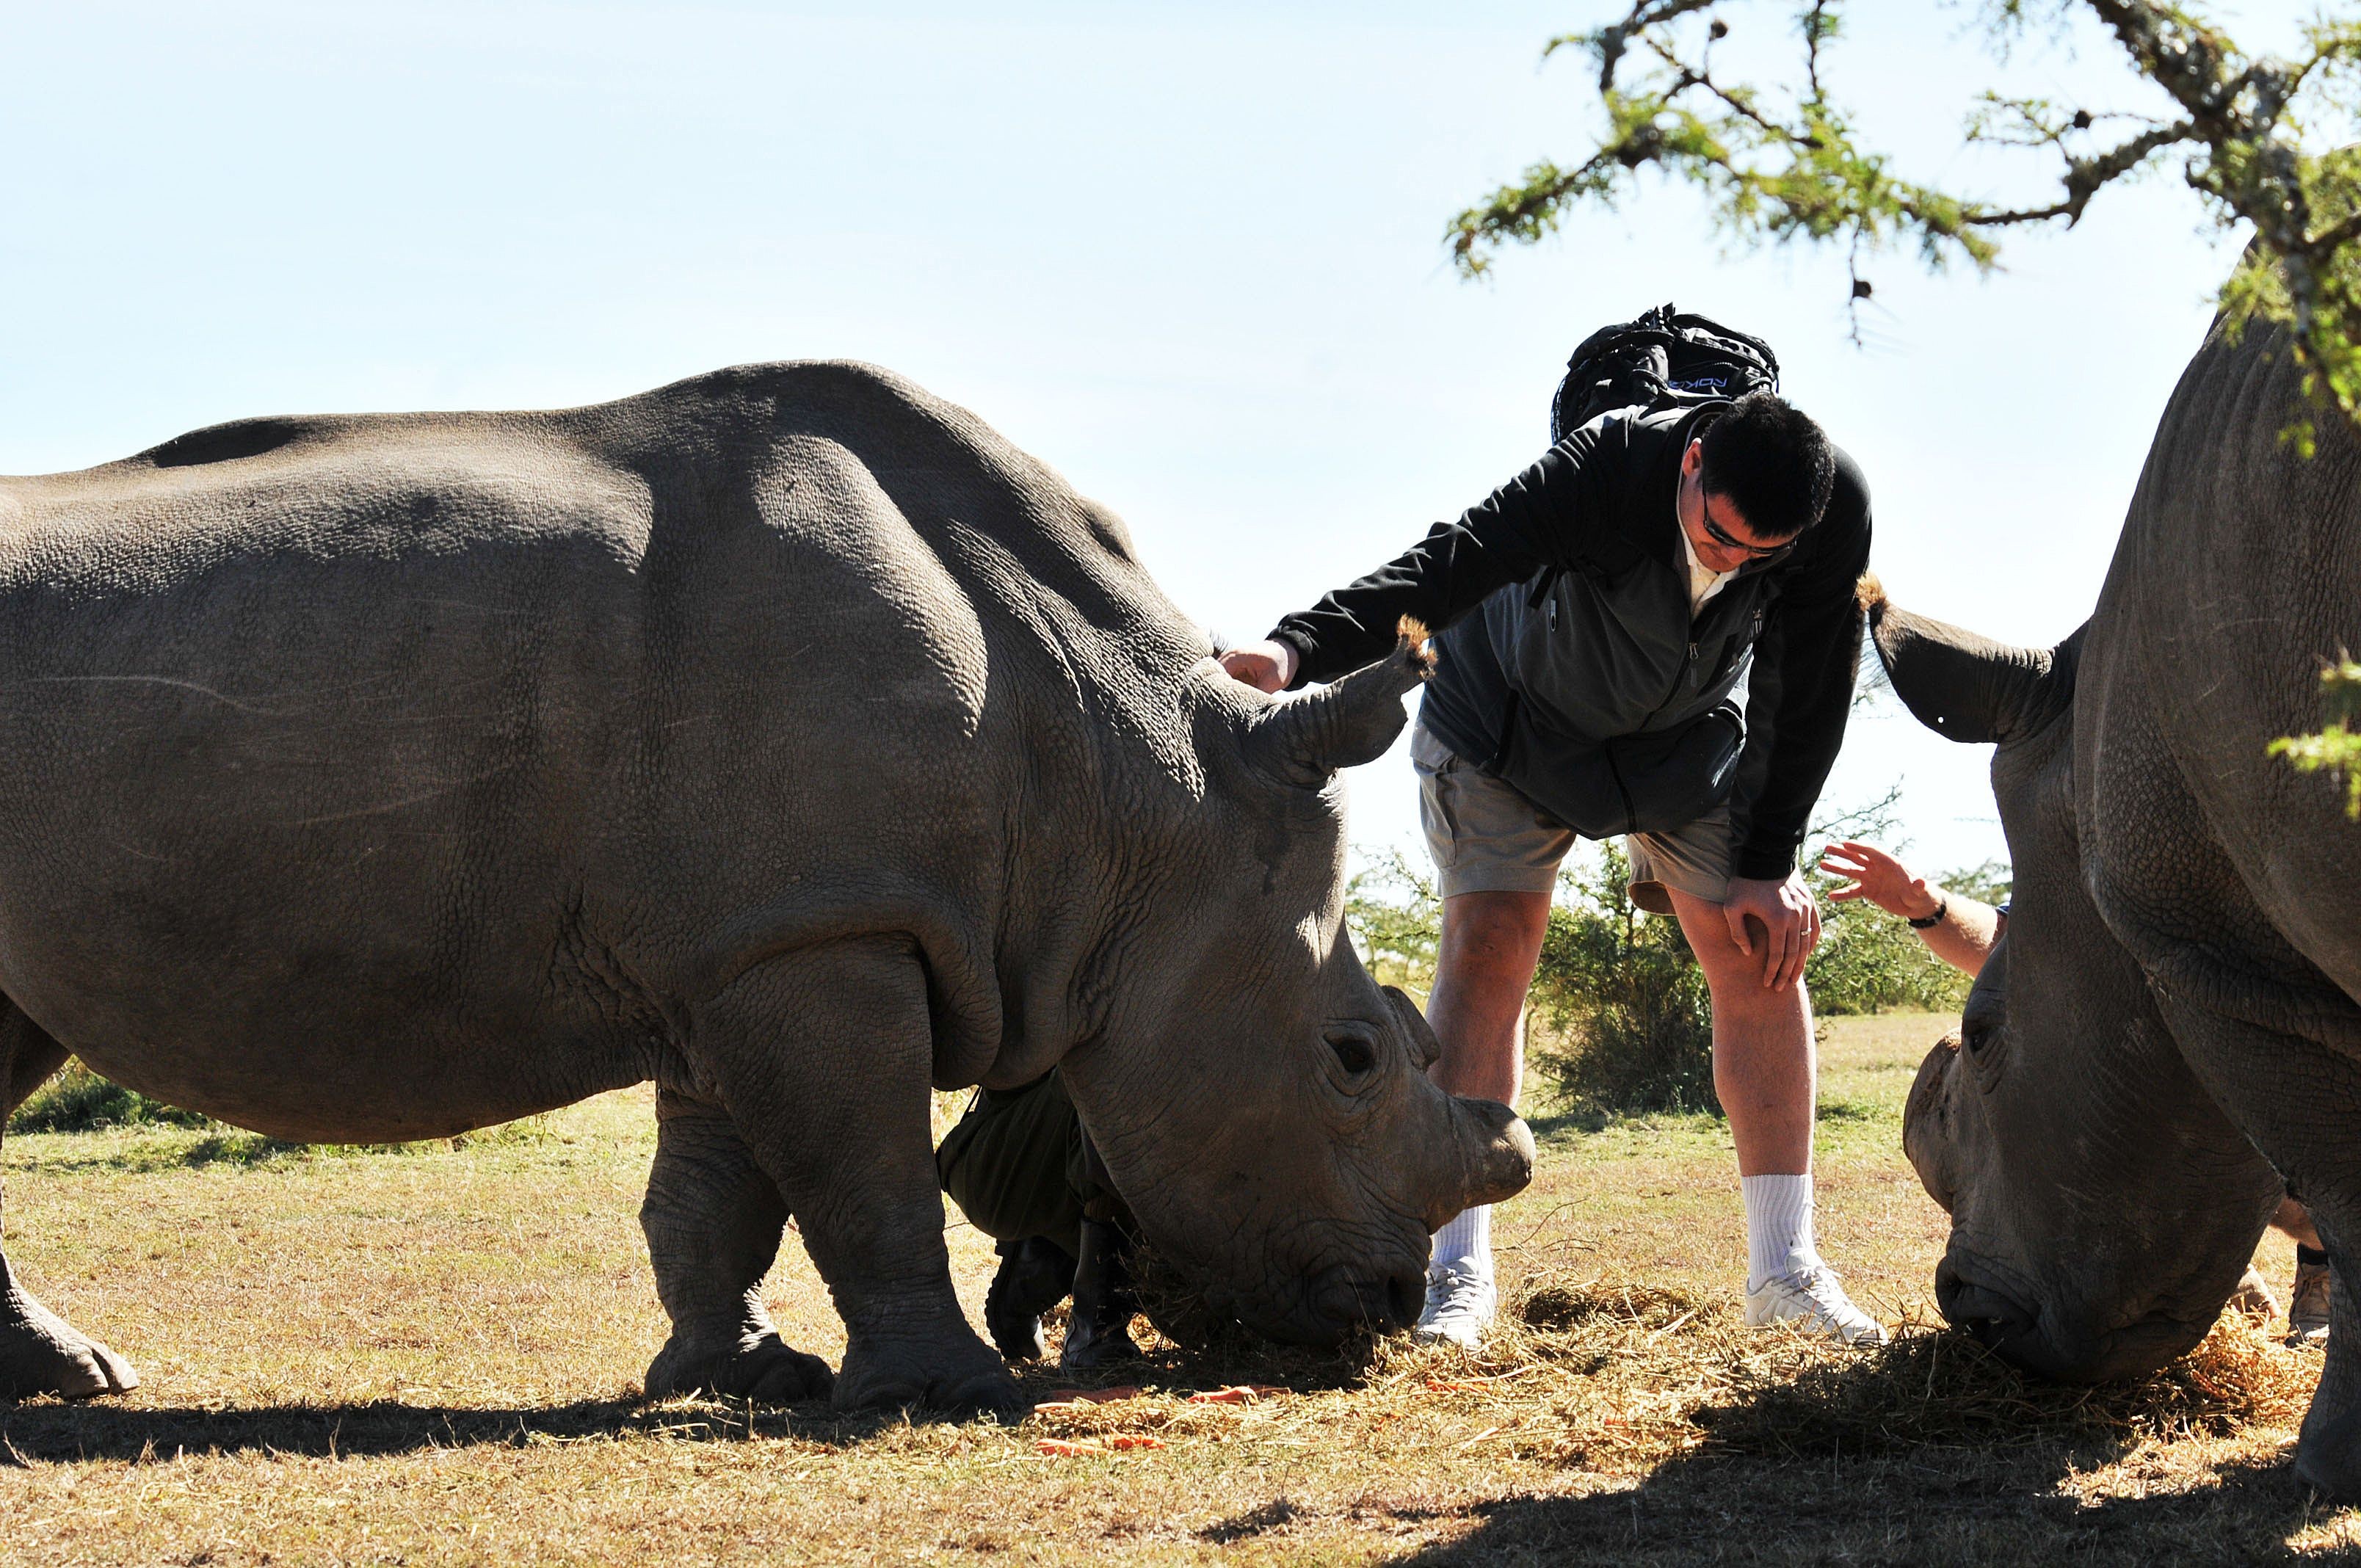 Yao Ming, Chinese basketball star and Wild Aid Ambassador, with northern white rhinos at the Ol-Pejetta Conservancy in Nanyuki, Kenya, on August 11, 2012. The Chinese government’s recent decision to reverse its ban on rhino and tiger products sparked an international outcry. The government then announced that the implementation of the new policy would be delayed. Photo: AFP